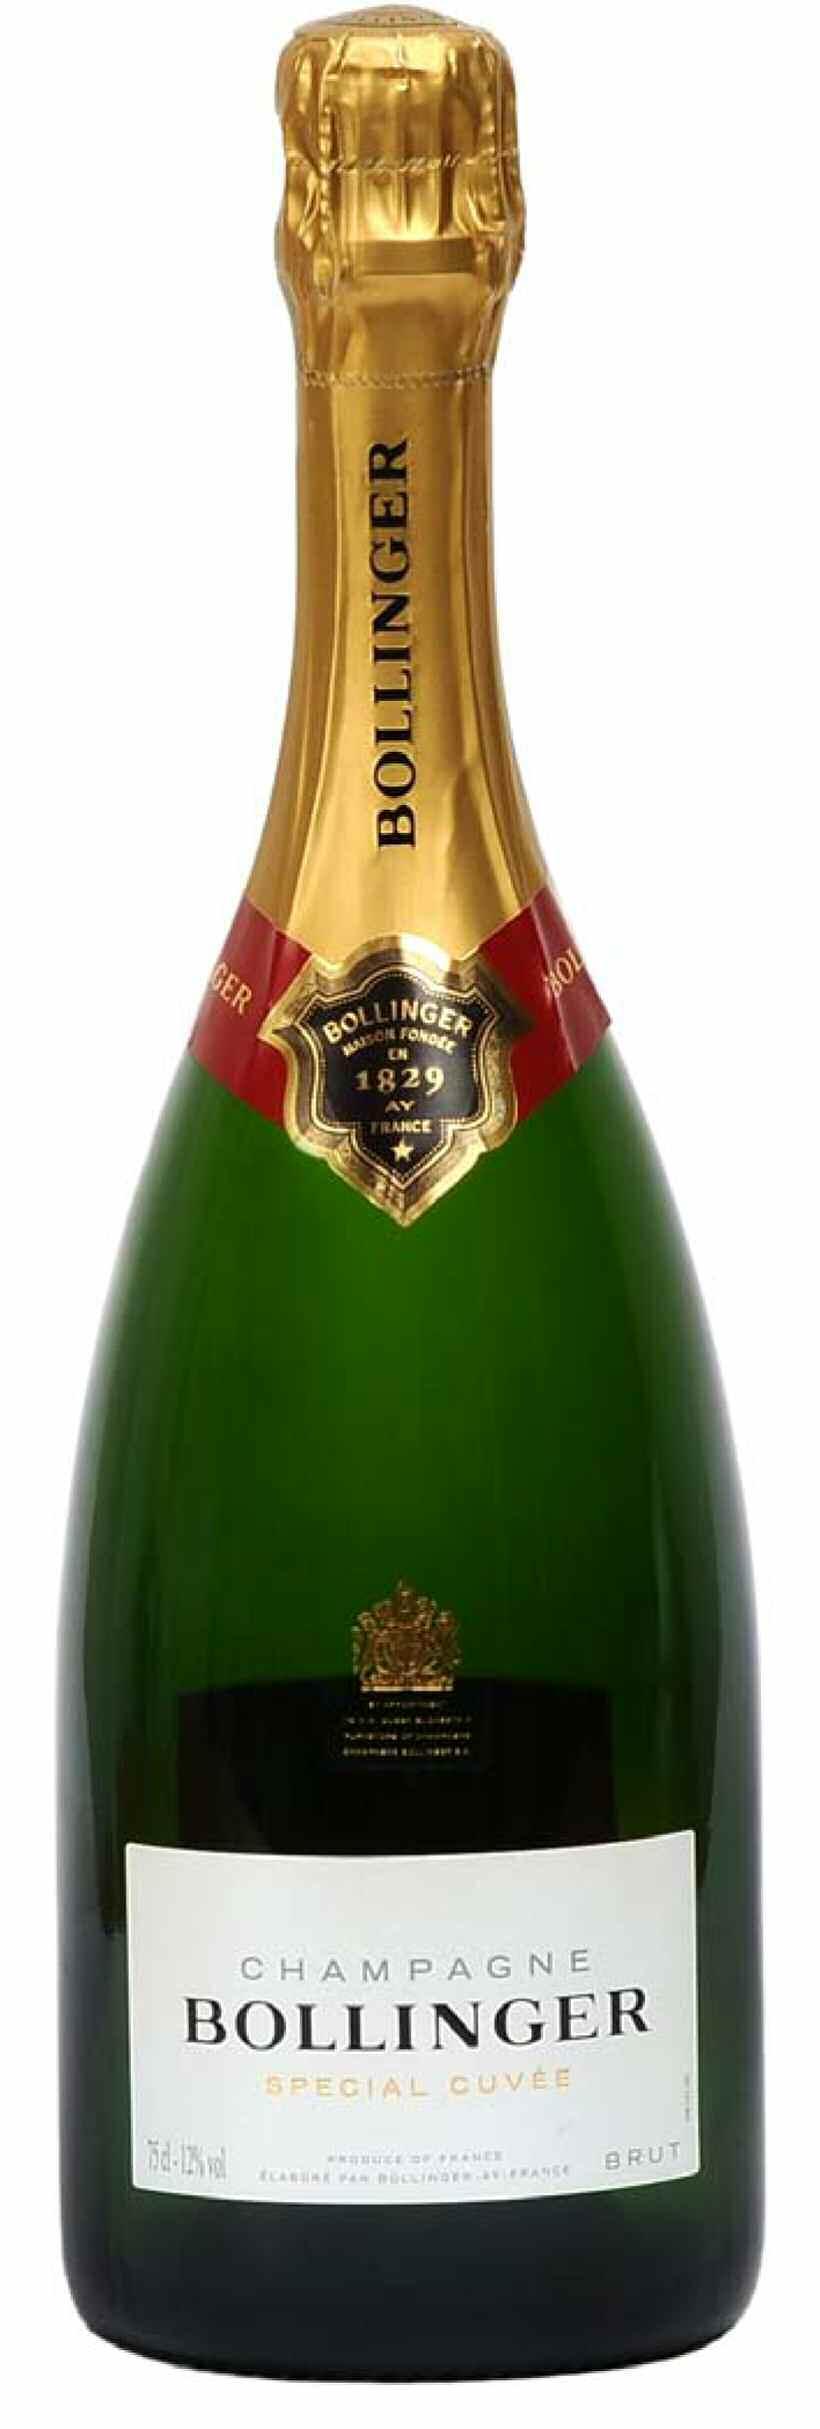 Pag. 23 BOLLINGER Champagne Bollinger Special Cuvèe Chardonnay 25%, Pinot Meunier 15%, Pinot Noir 60%.